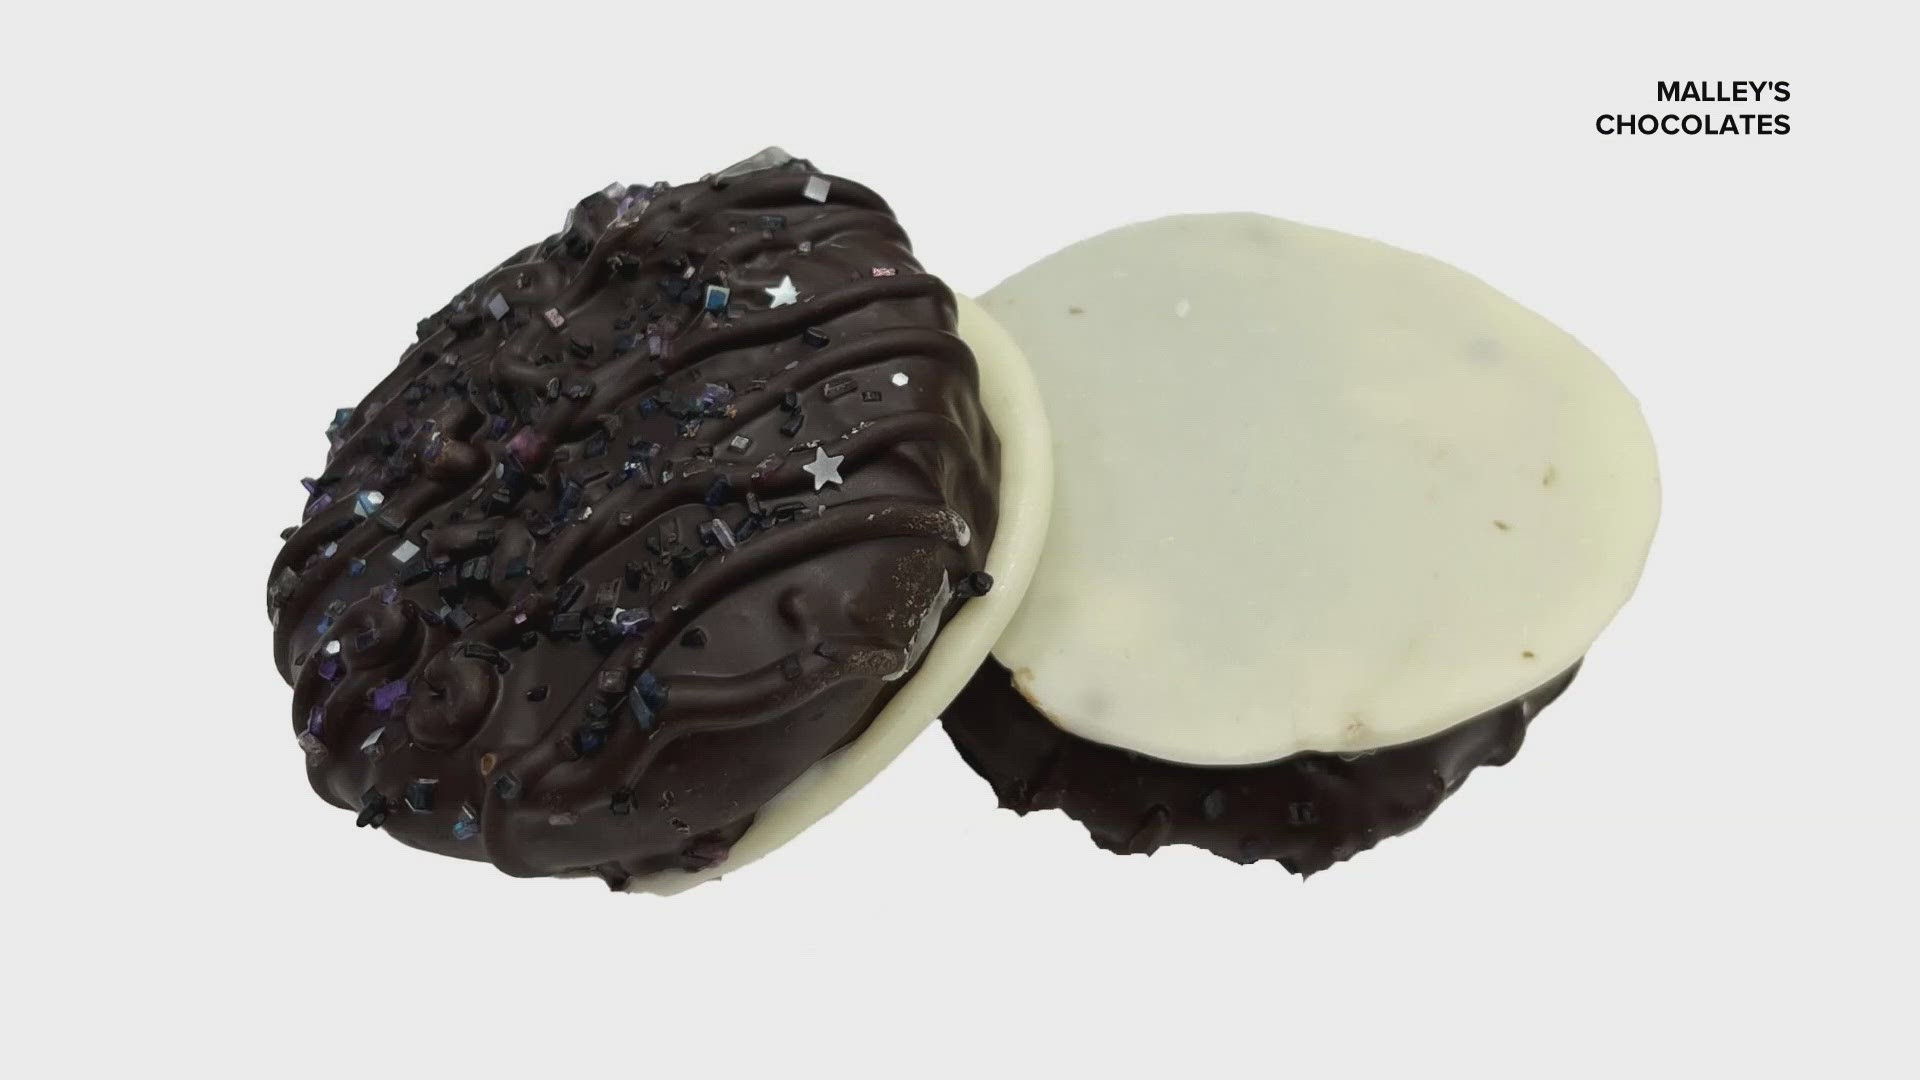 Malley's Chocolates has a new sweet treat to commemorate the upcoming solar eclipse. President Mike Malley joined Front Row to talk about the celestial confection.